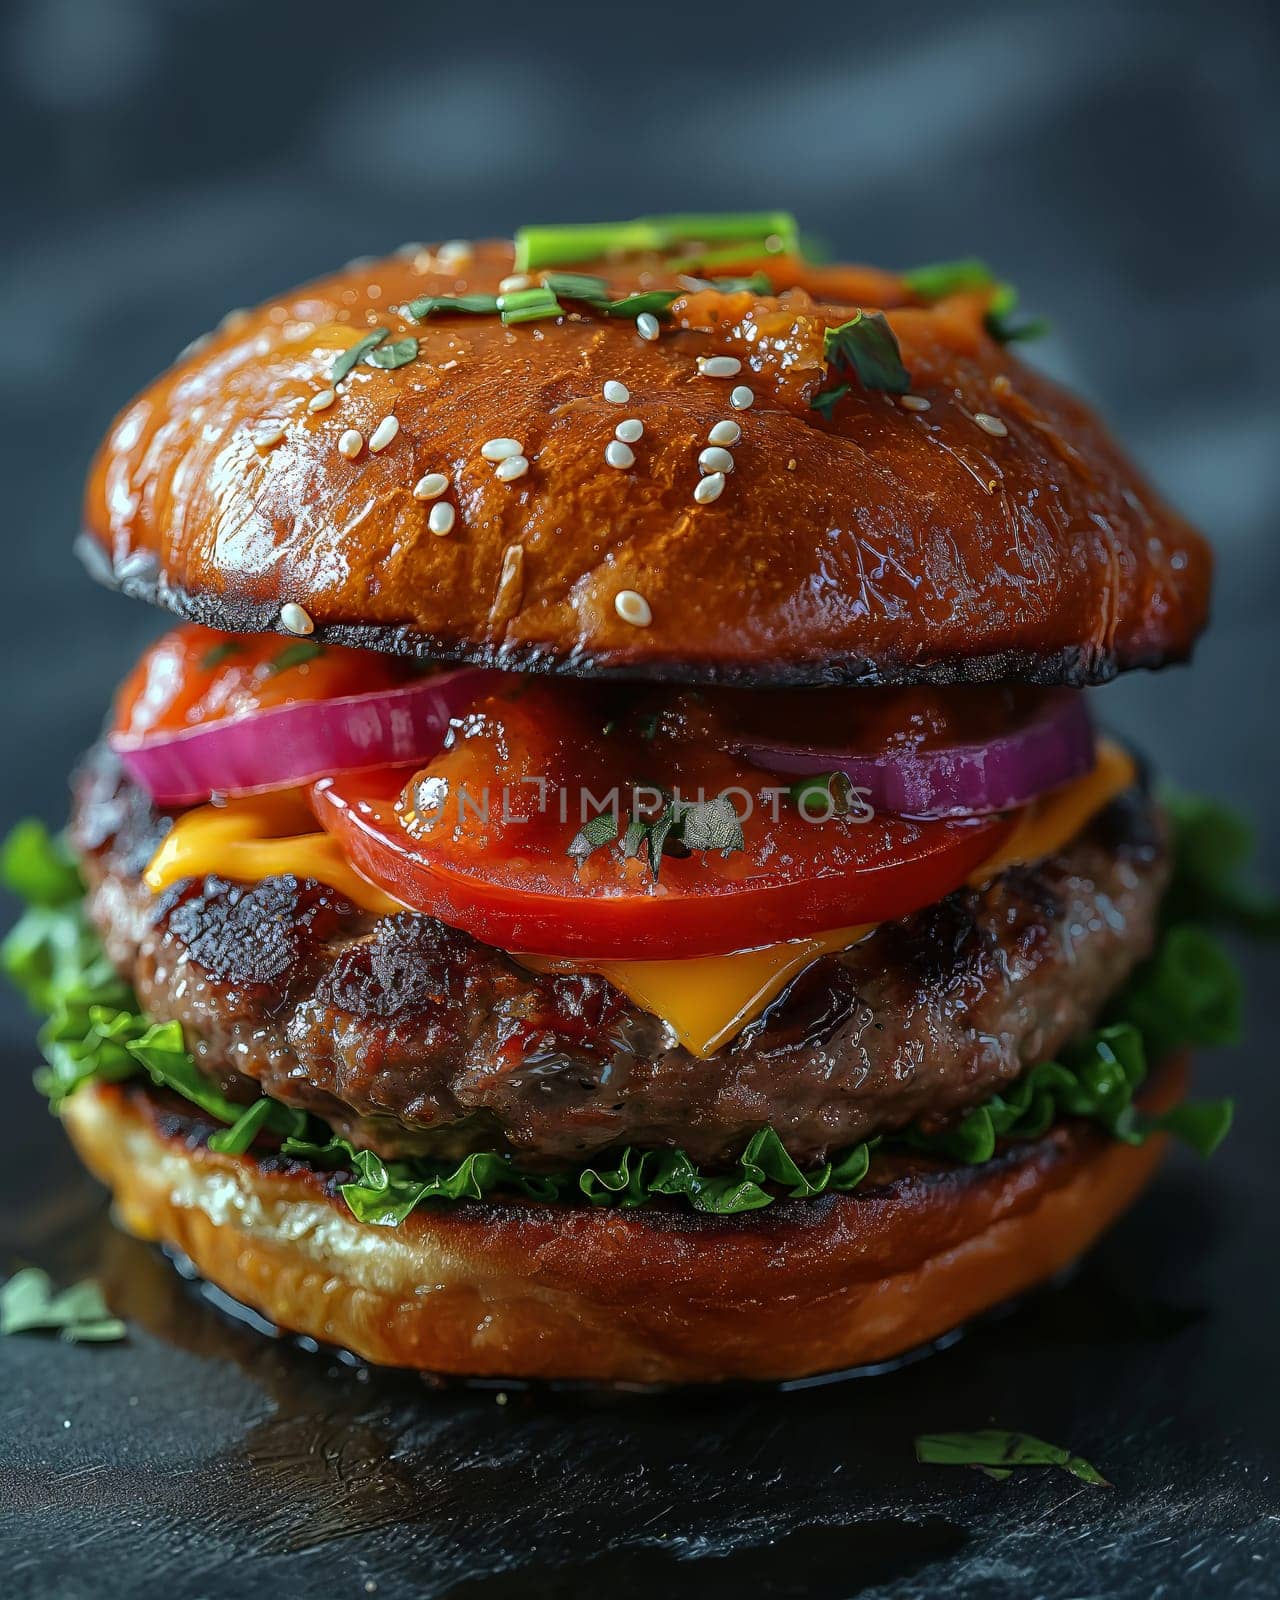 Juicy and tasty burger on a blurred background. by Fischeron